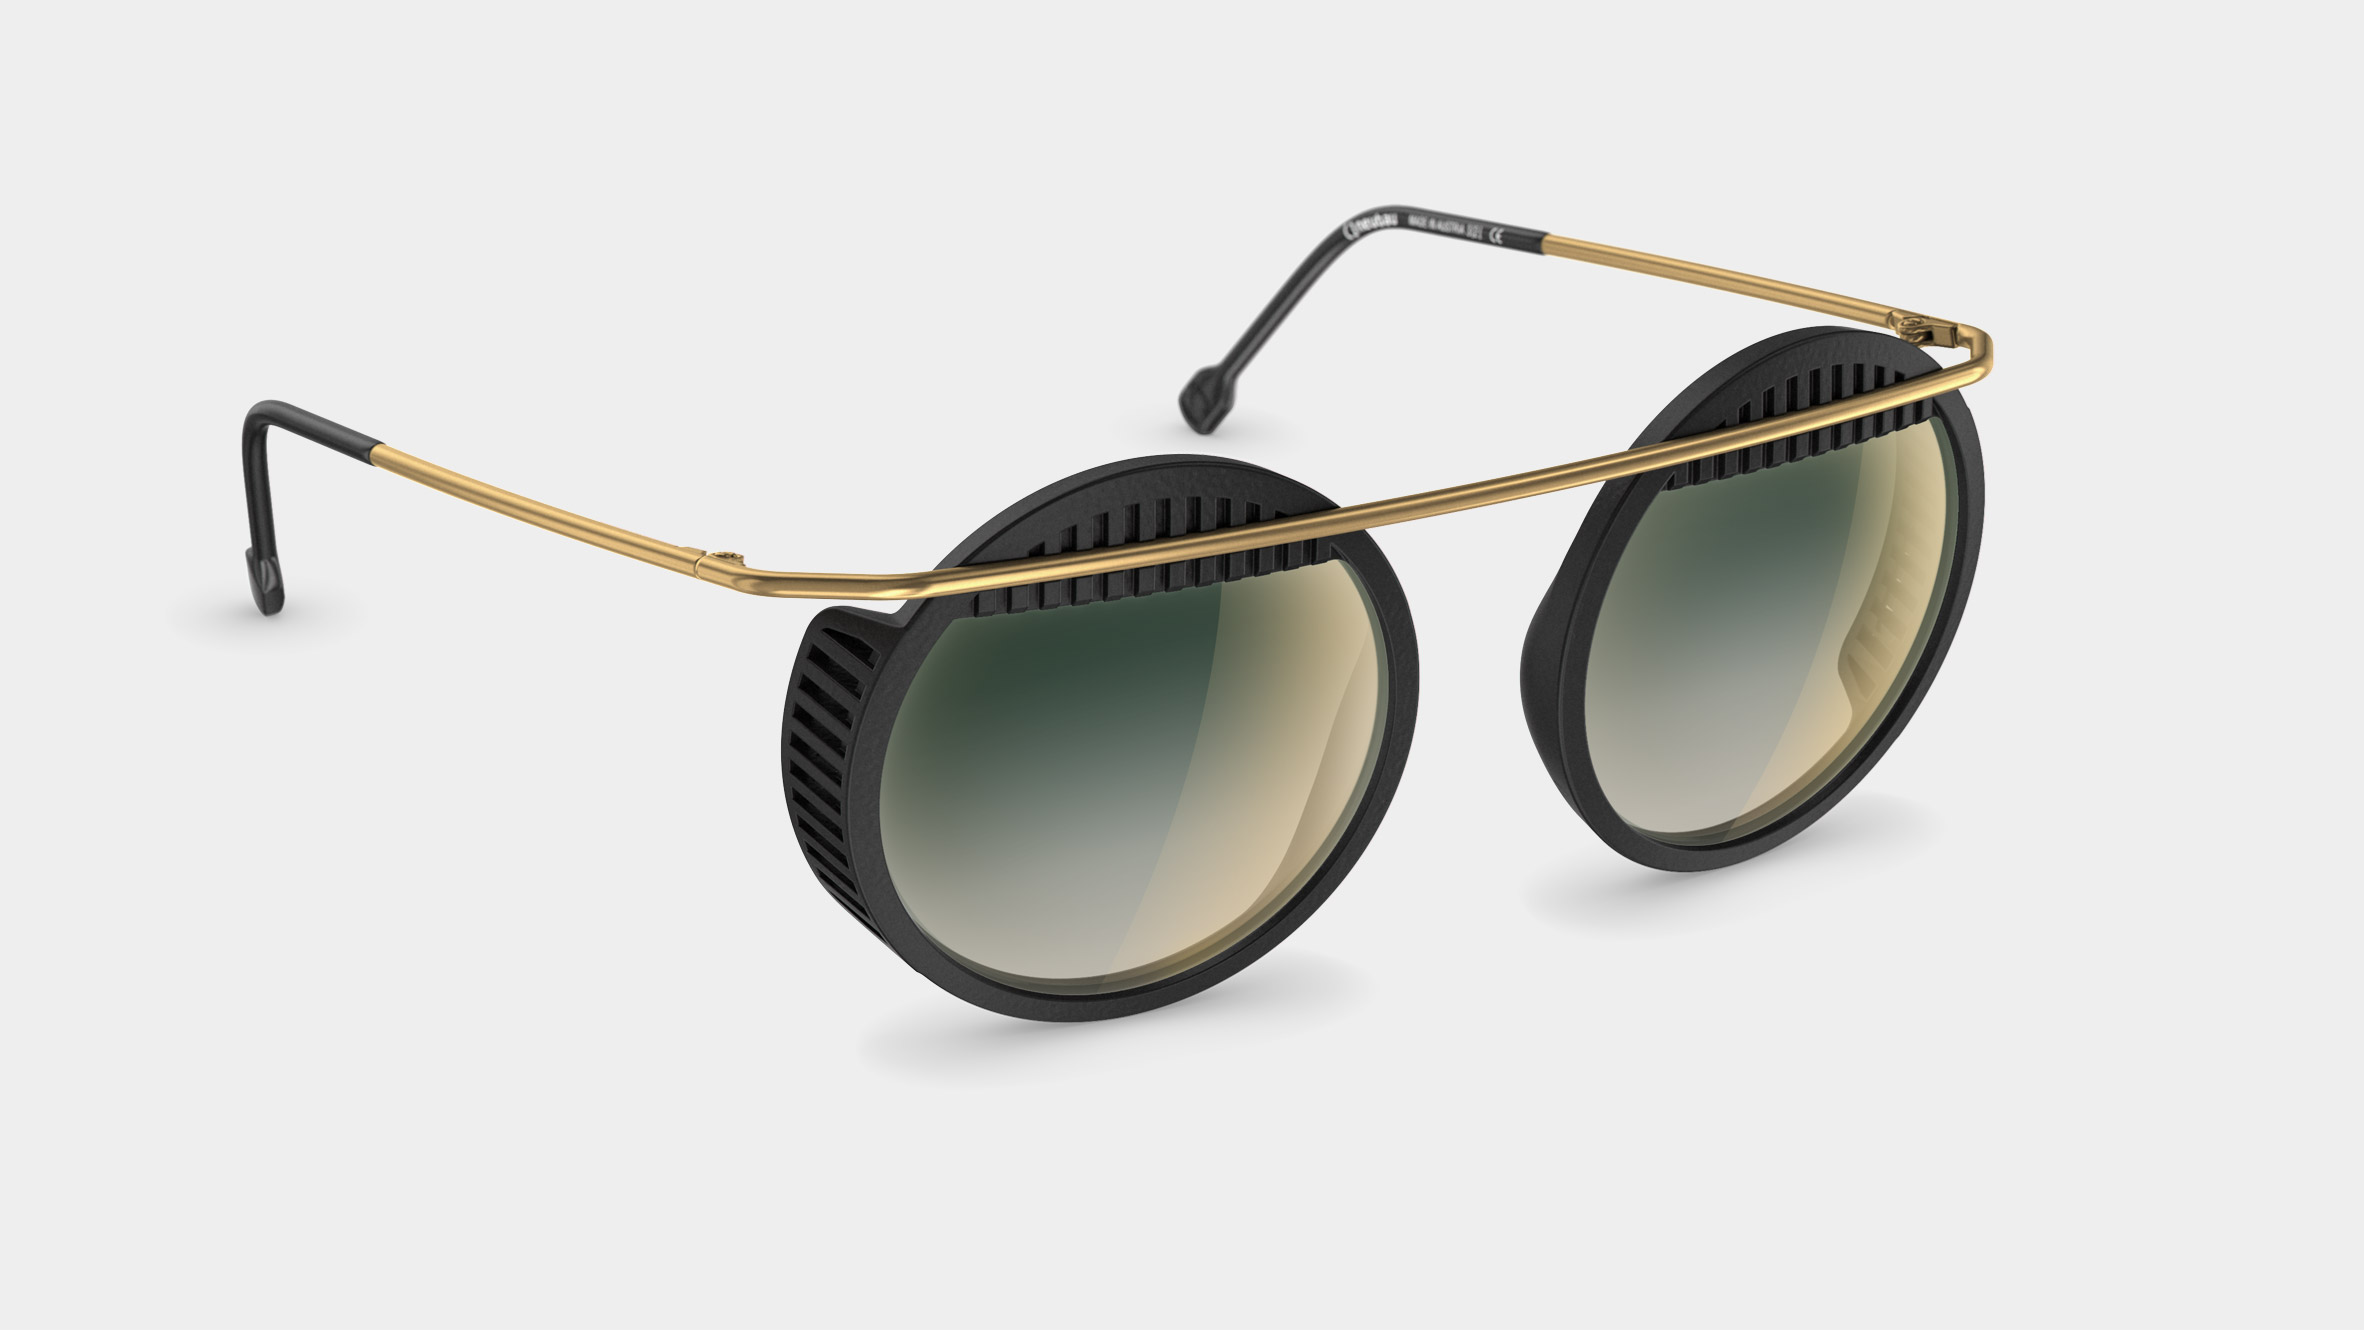 Walter & Wassily sunglasses collection by Neubau for Bauhaus 100 anniversary